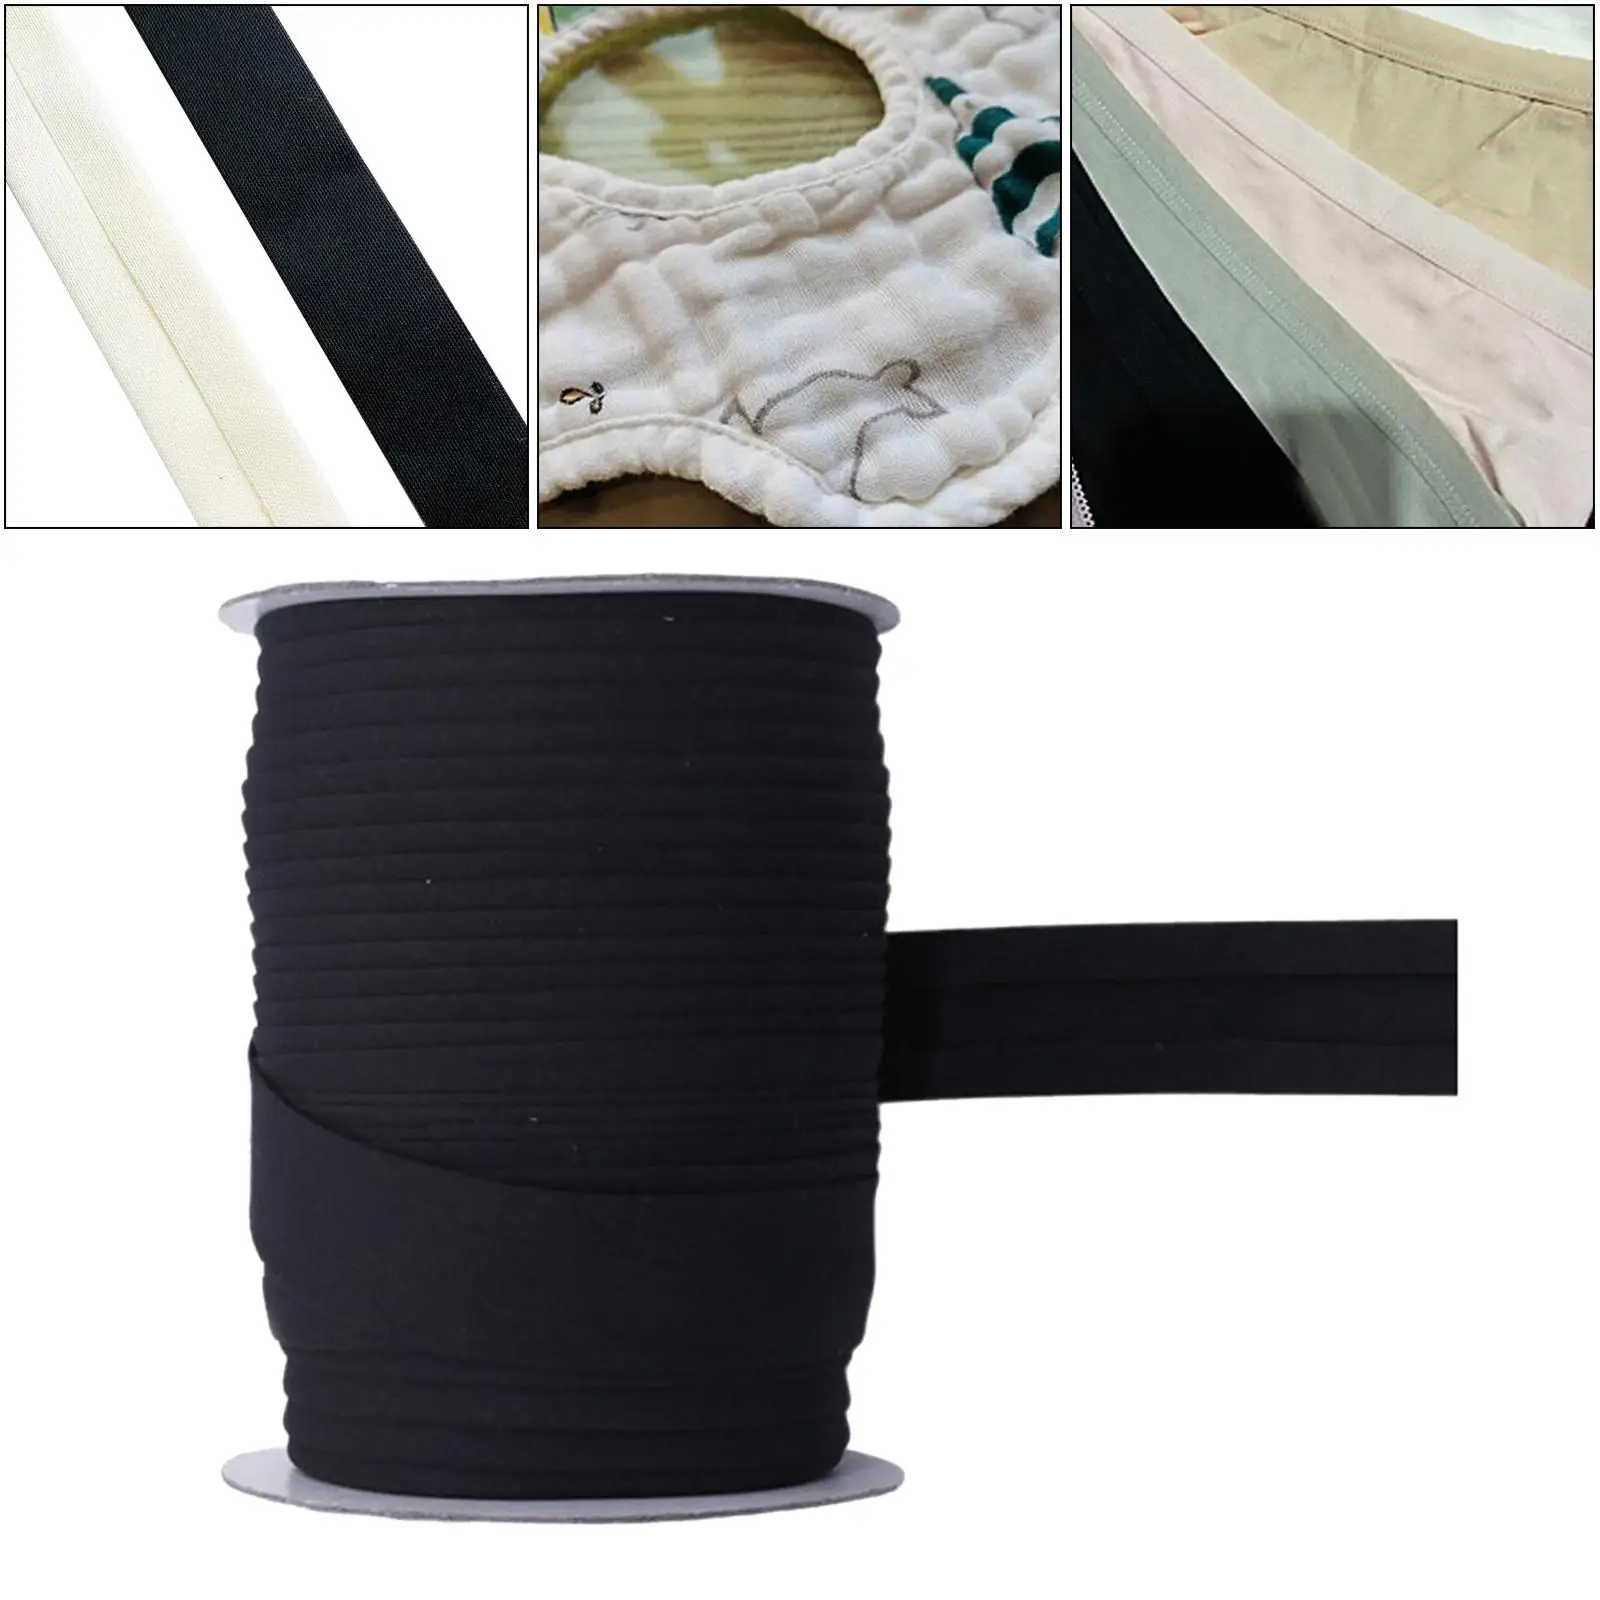 Elastic Band Cord 1 Roll 10 Yard Stretch Belt Straps Spandex Double Fold for Trouser Clothing Sewing Trimming Crafts Pants Pants